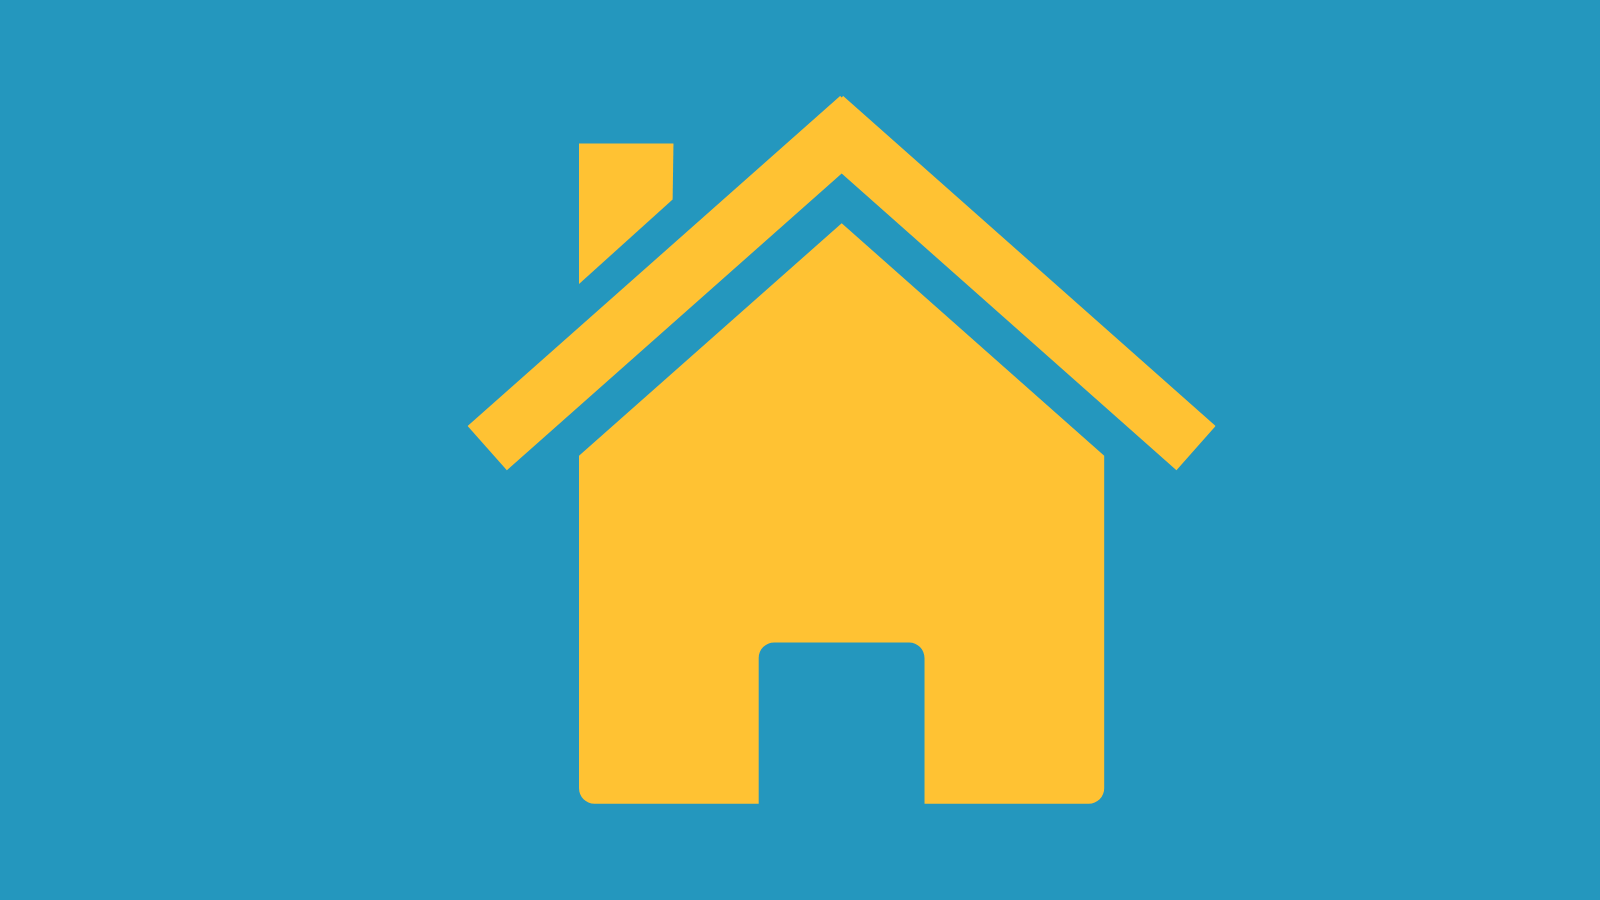 Minimalist icon of a house